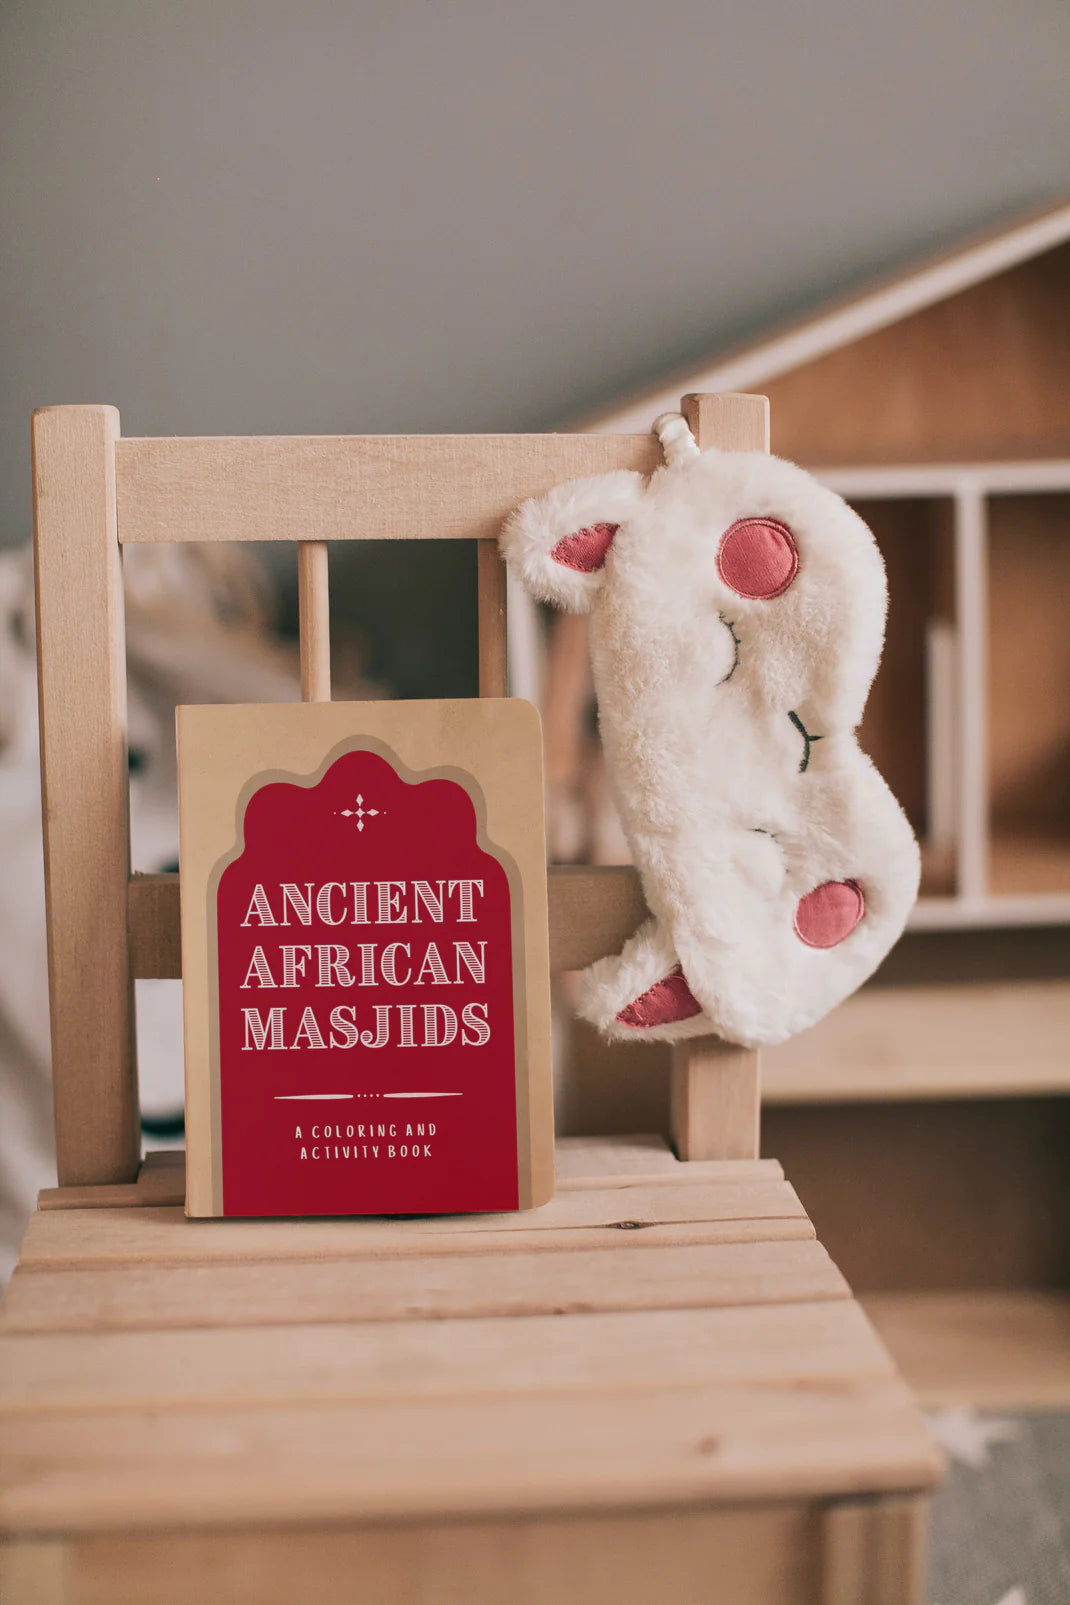 Ancient African Masjids: A Coloring & Activity Book